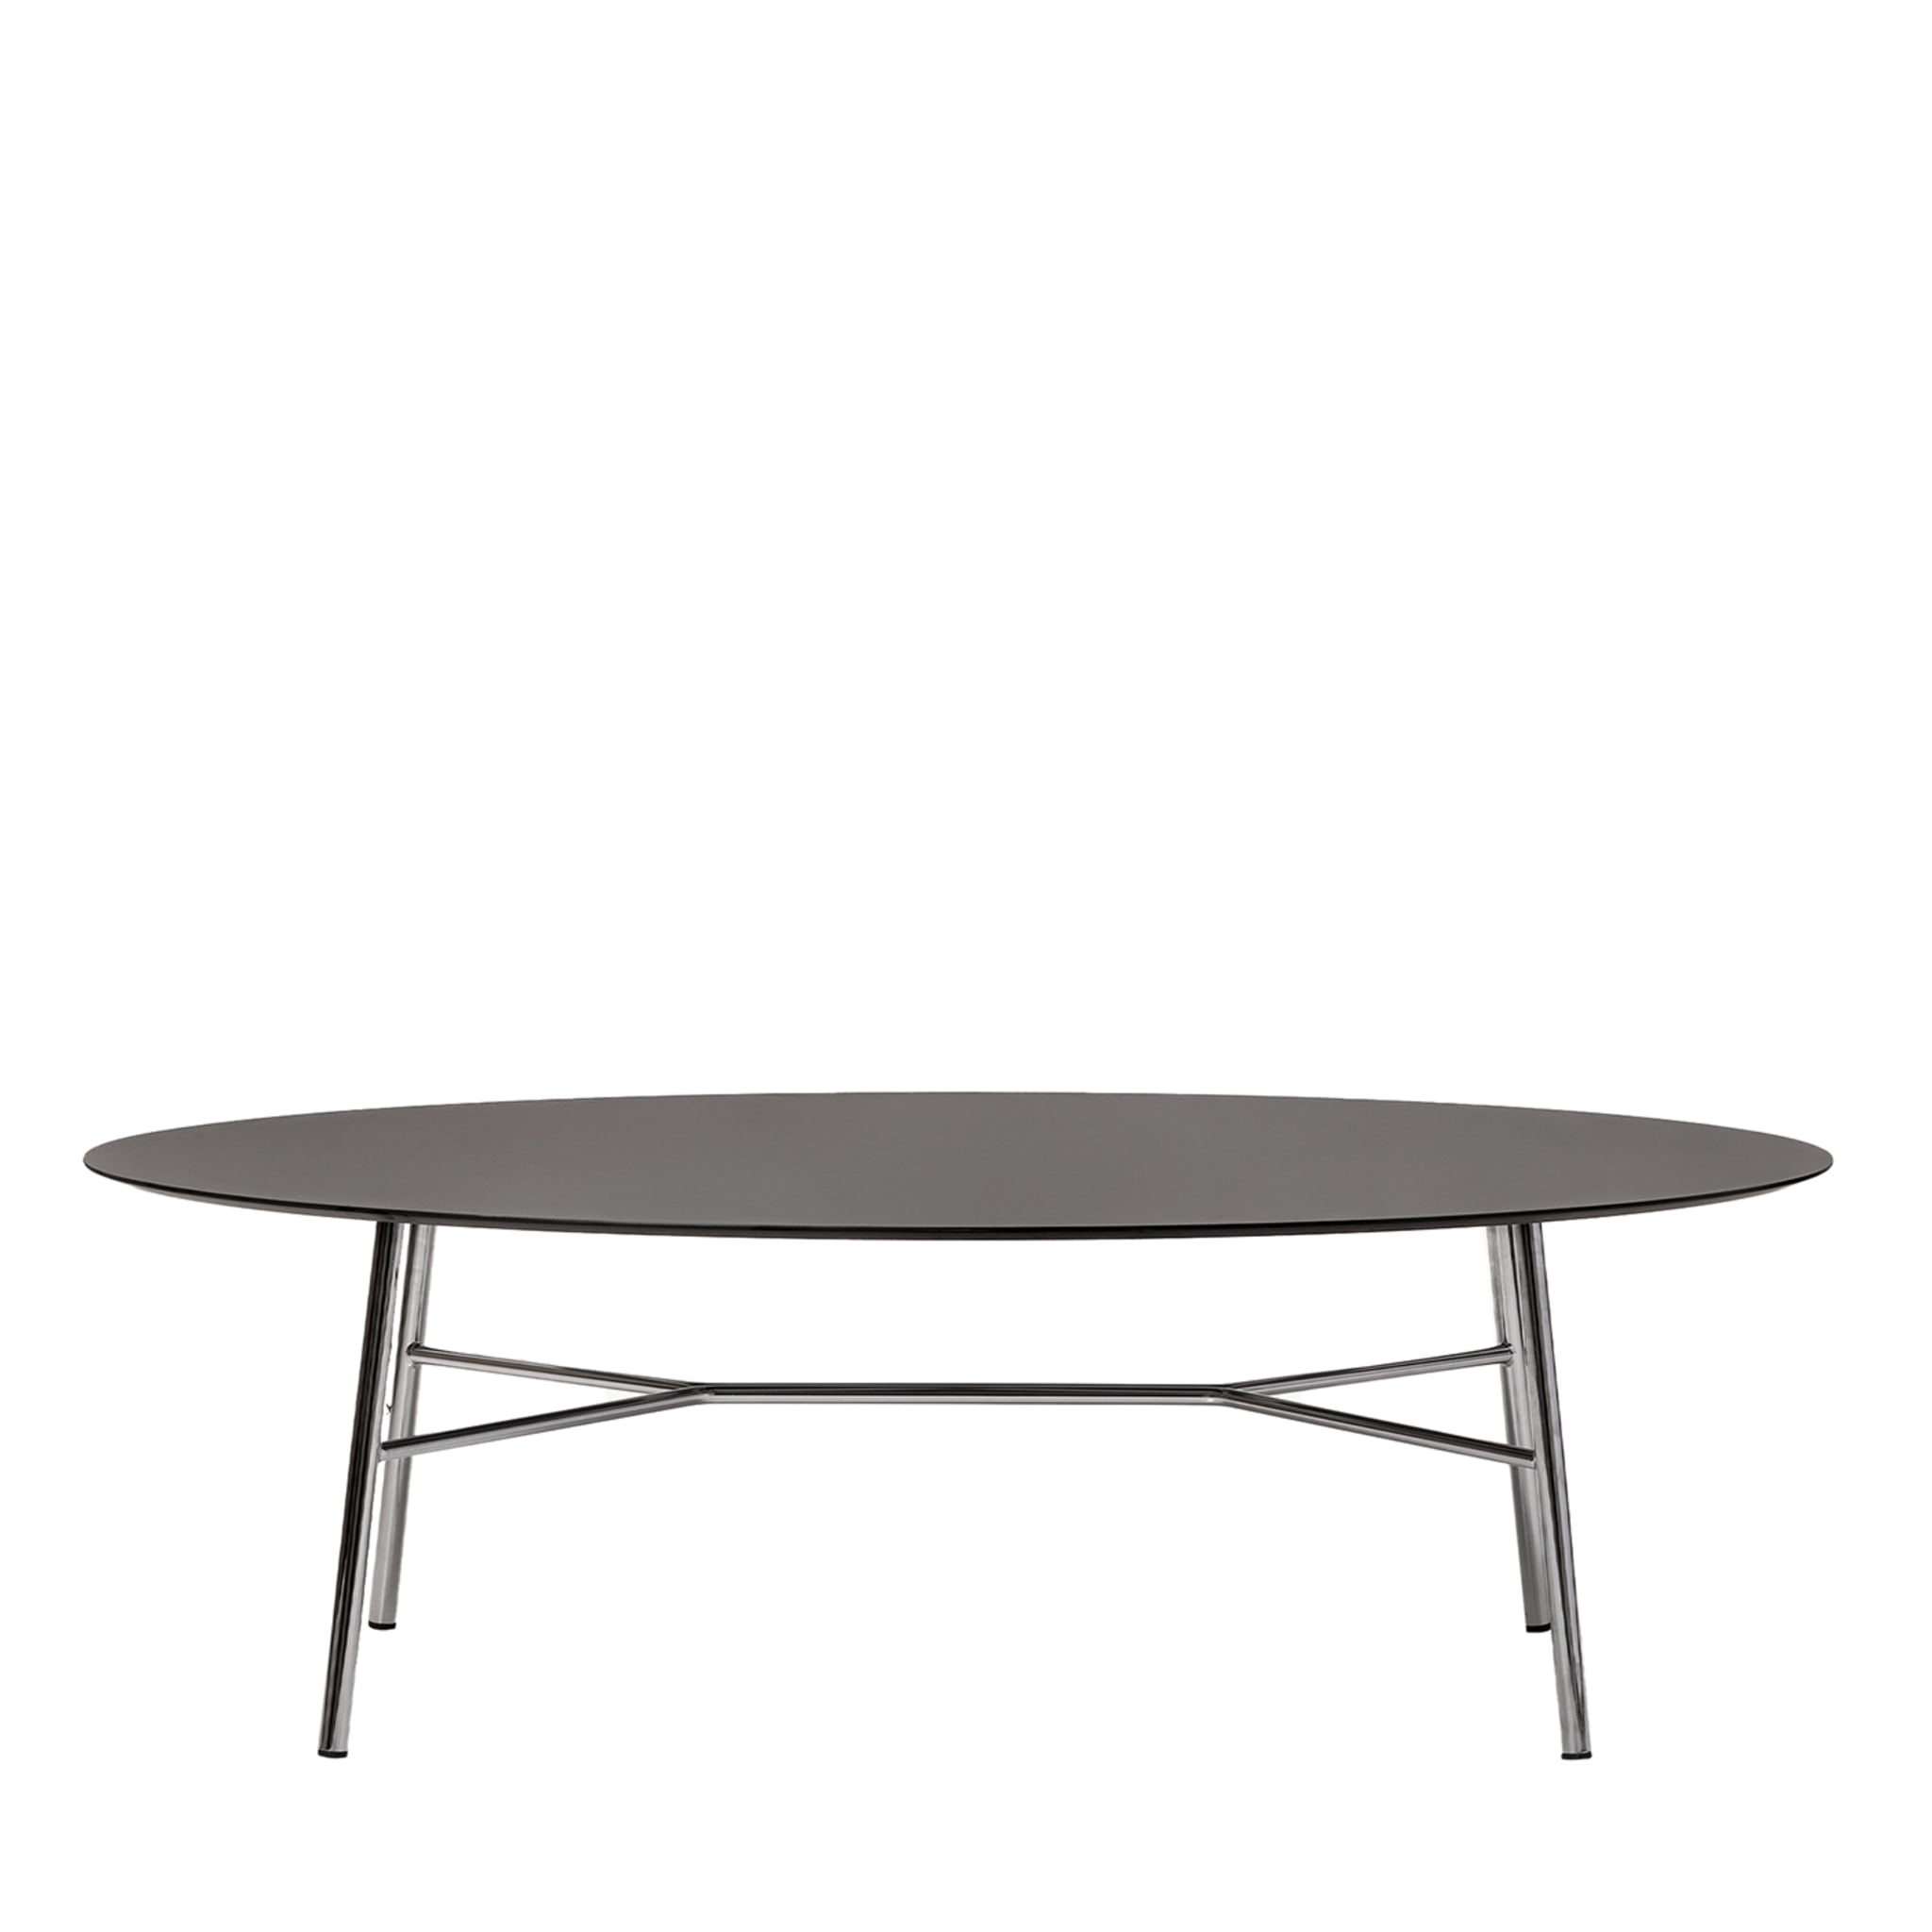 0128/S Yuki Oval Coffee Table with HPL Black Top by Ep Studio - Main view